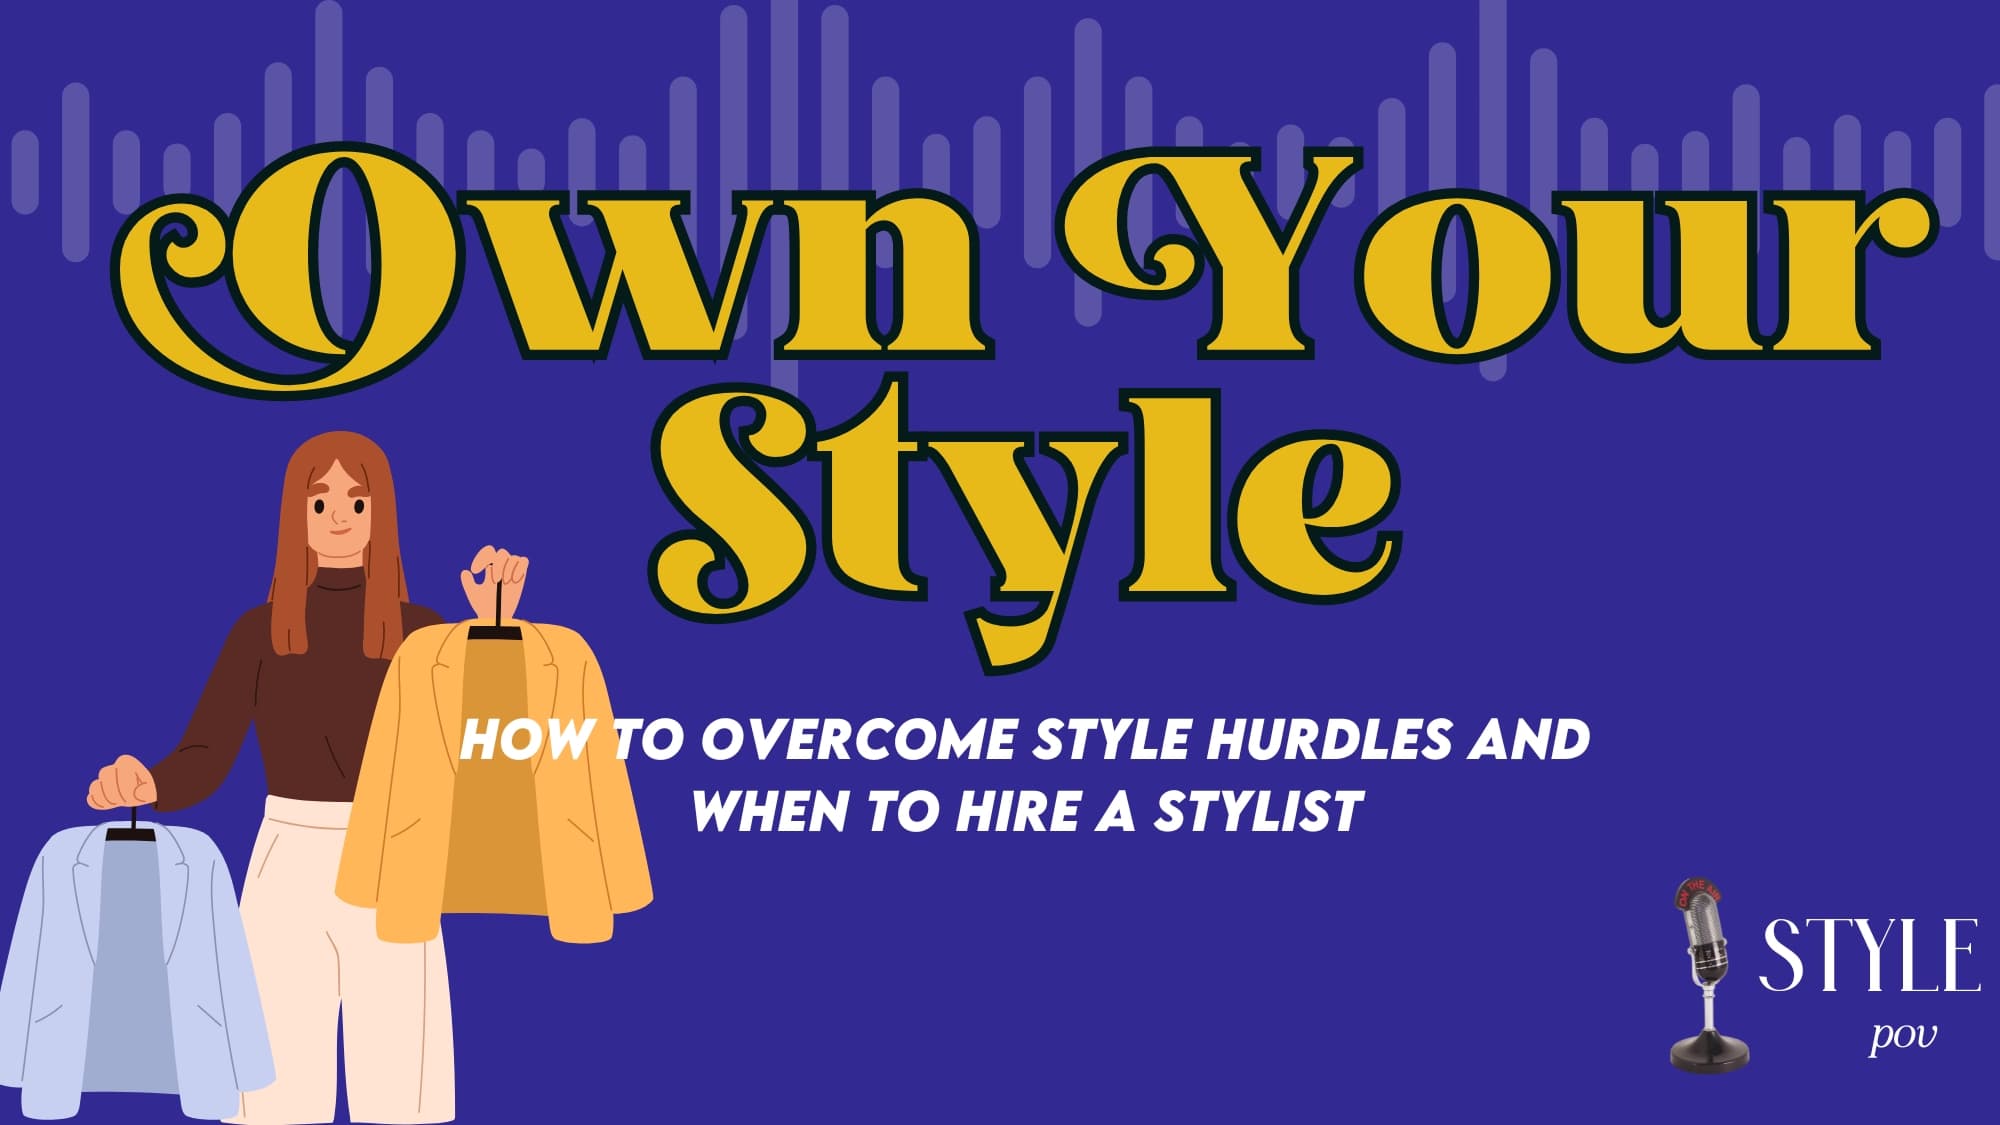 Own Your Style: Overcoming Style Hurdles and When to Hire a Stylist